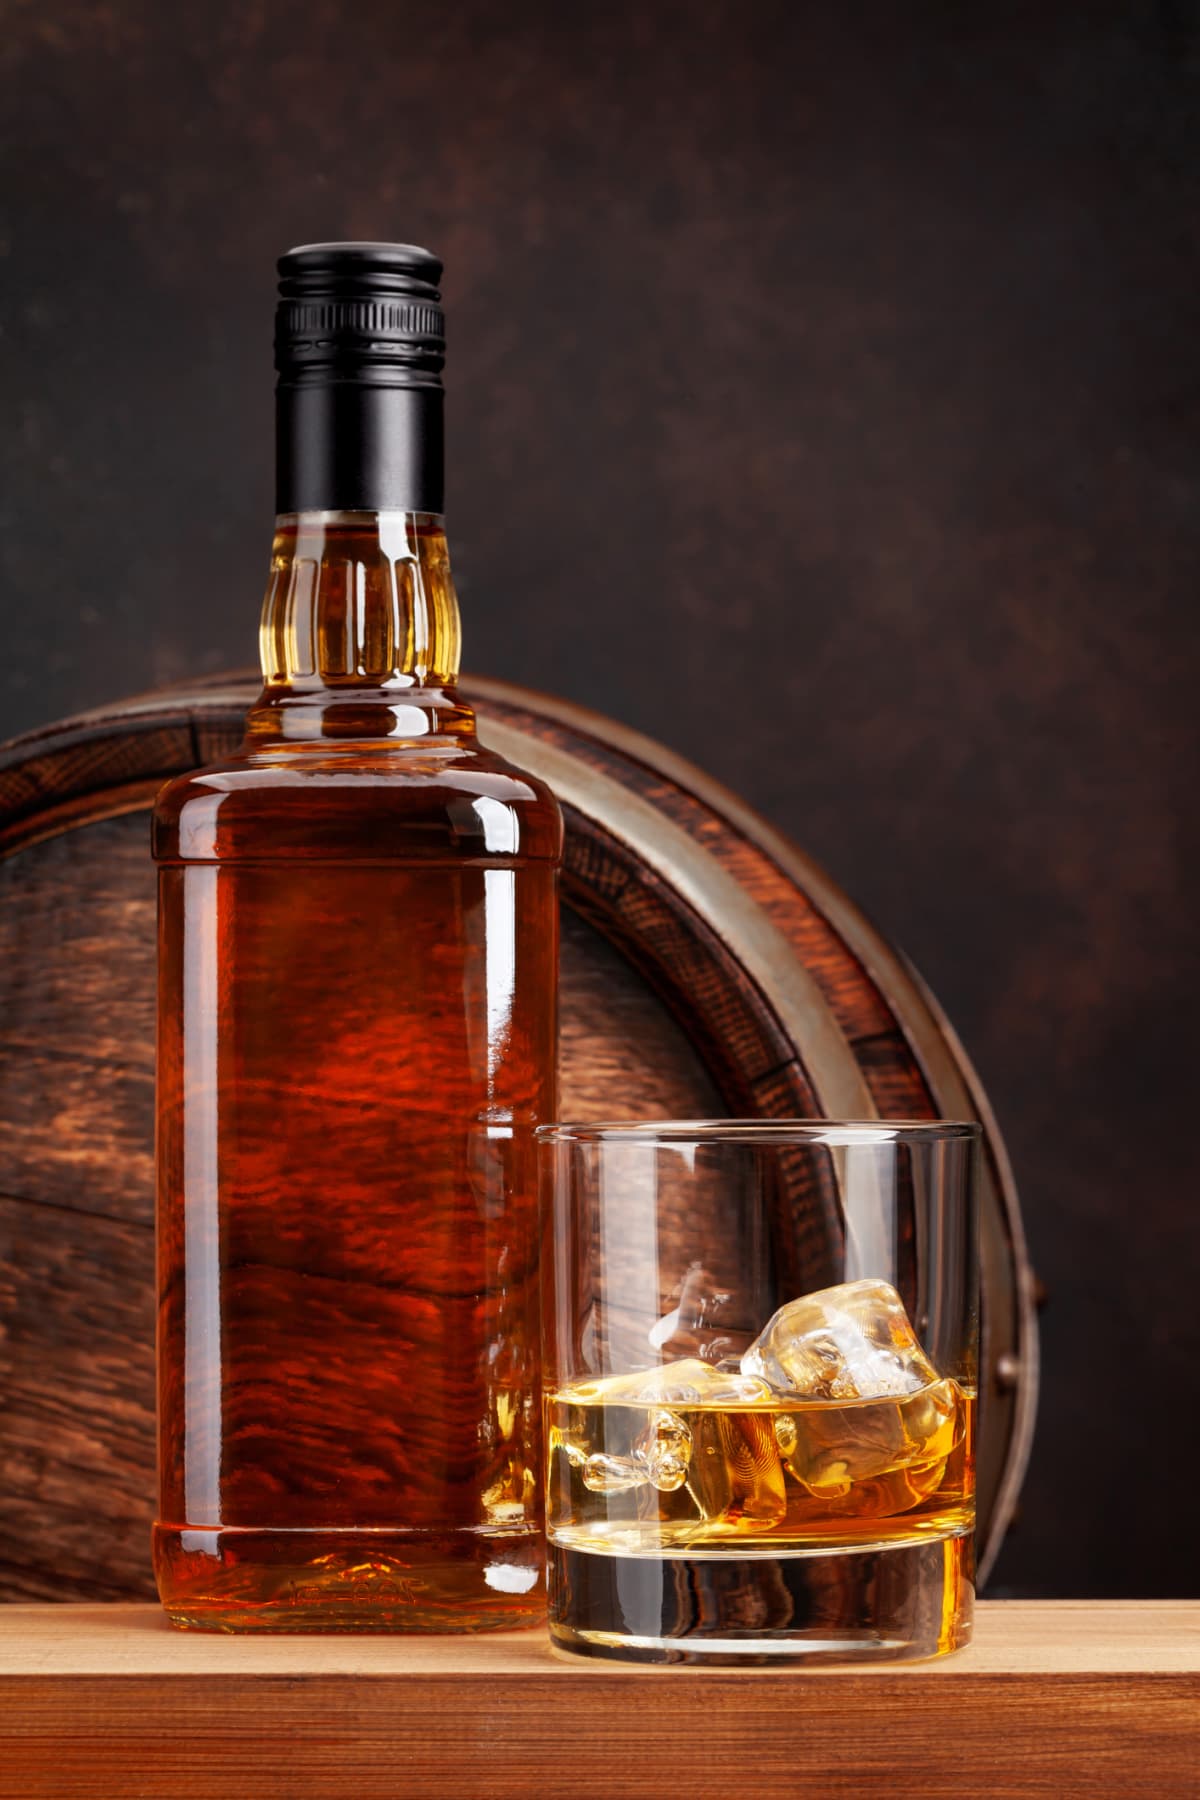 Scotch whiskey bottle, glass and old wooden barrel. With copy space